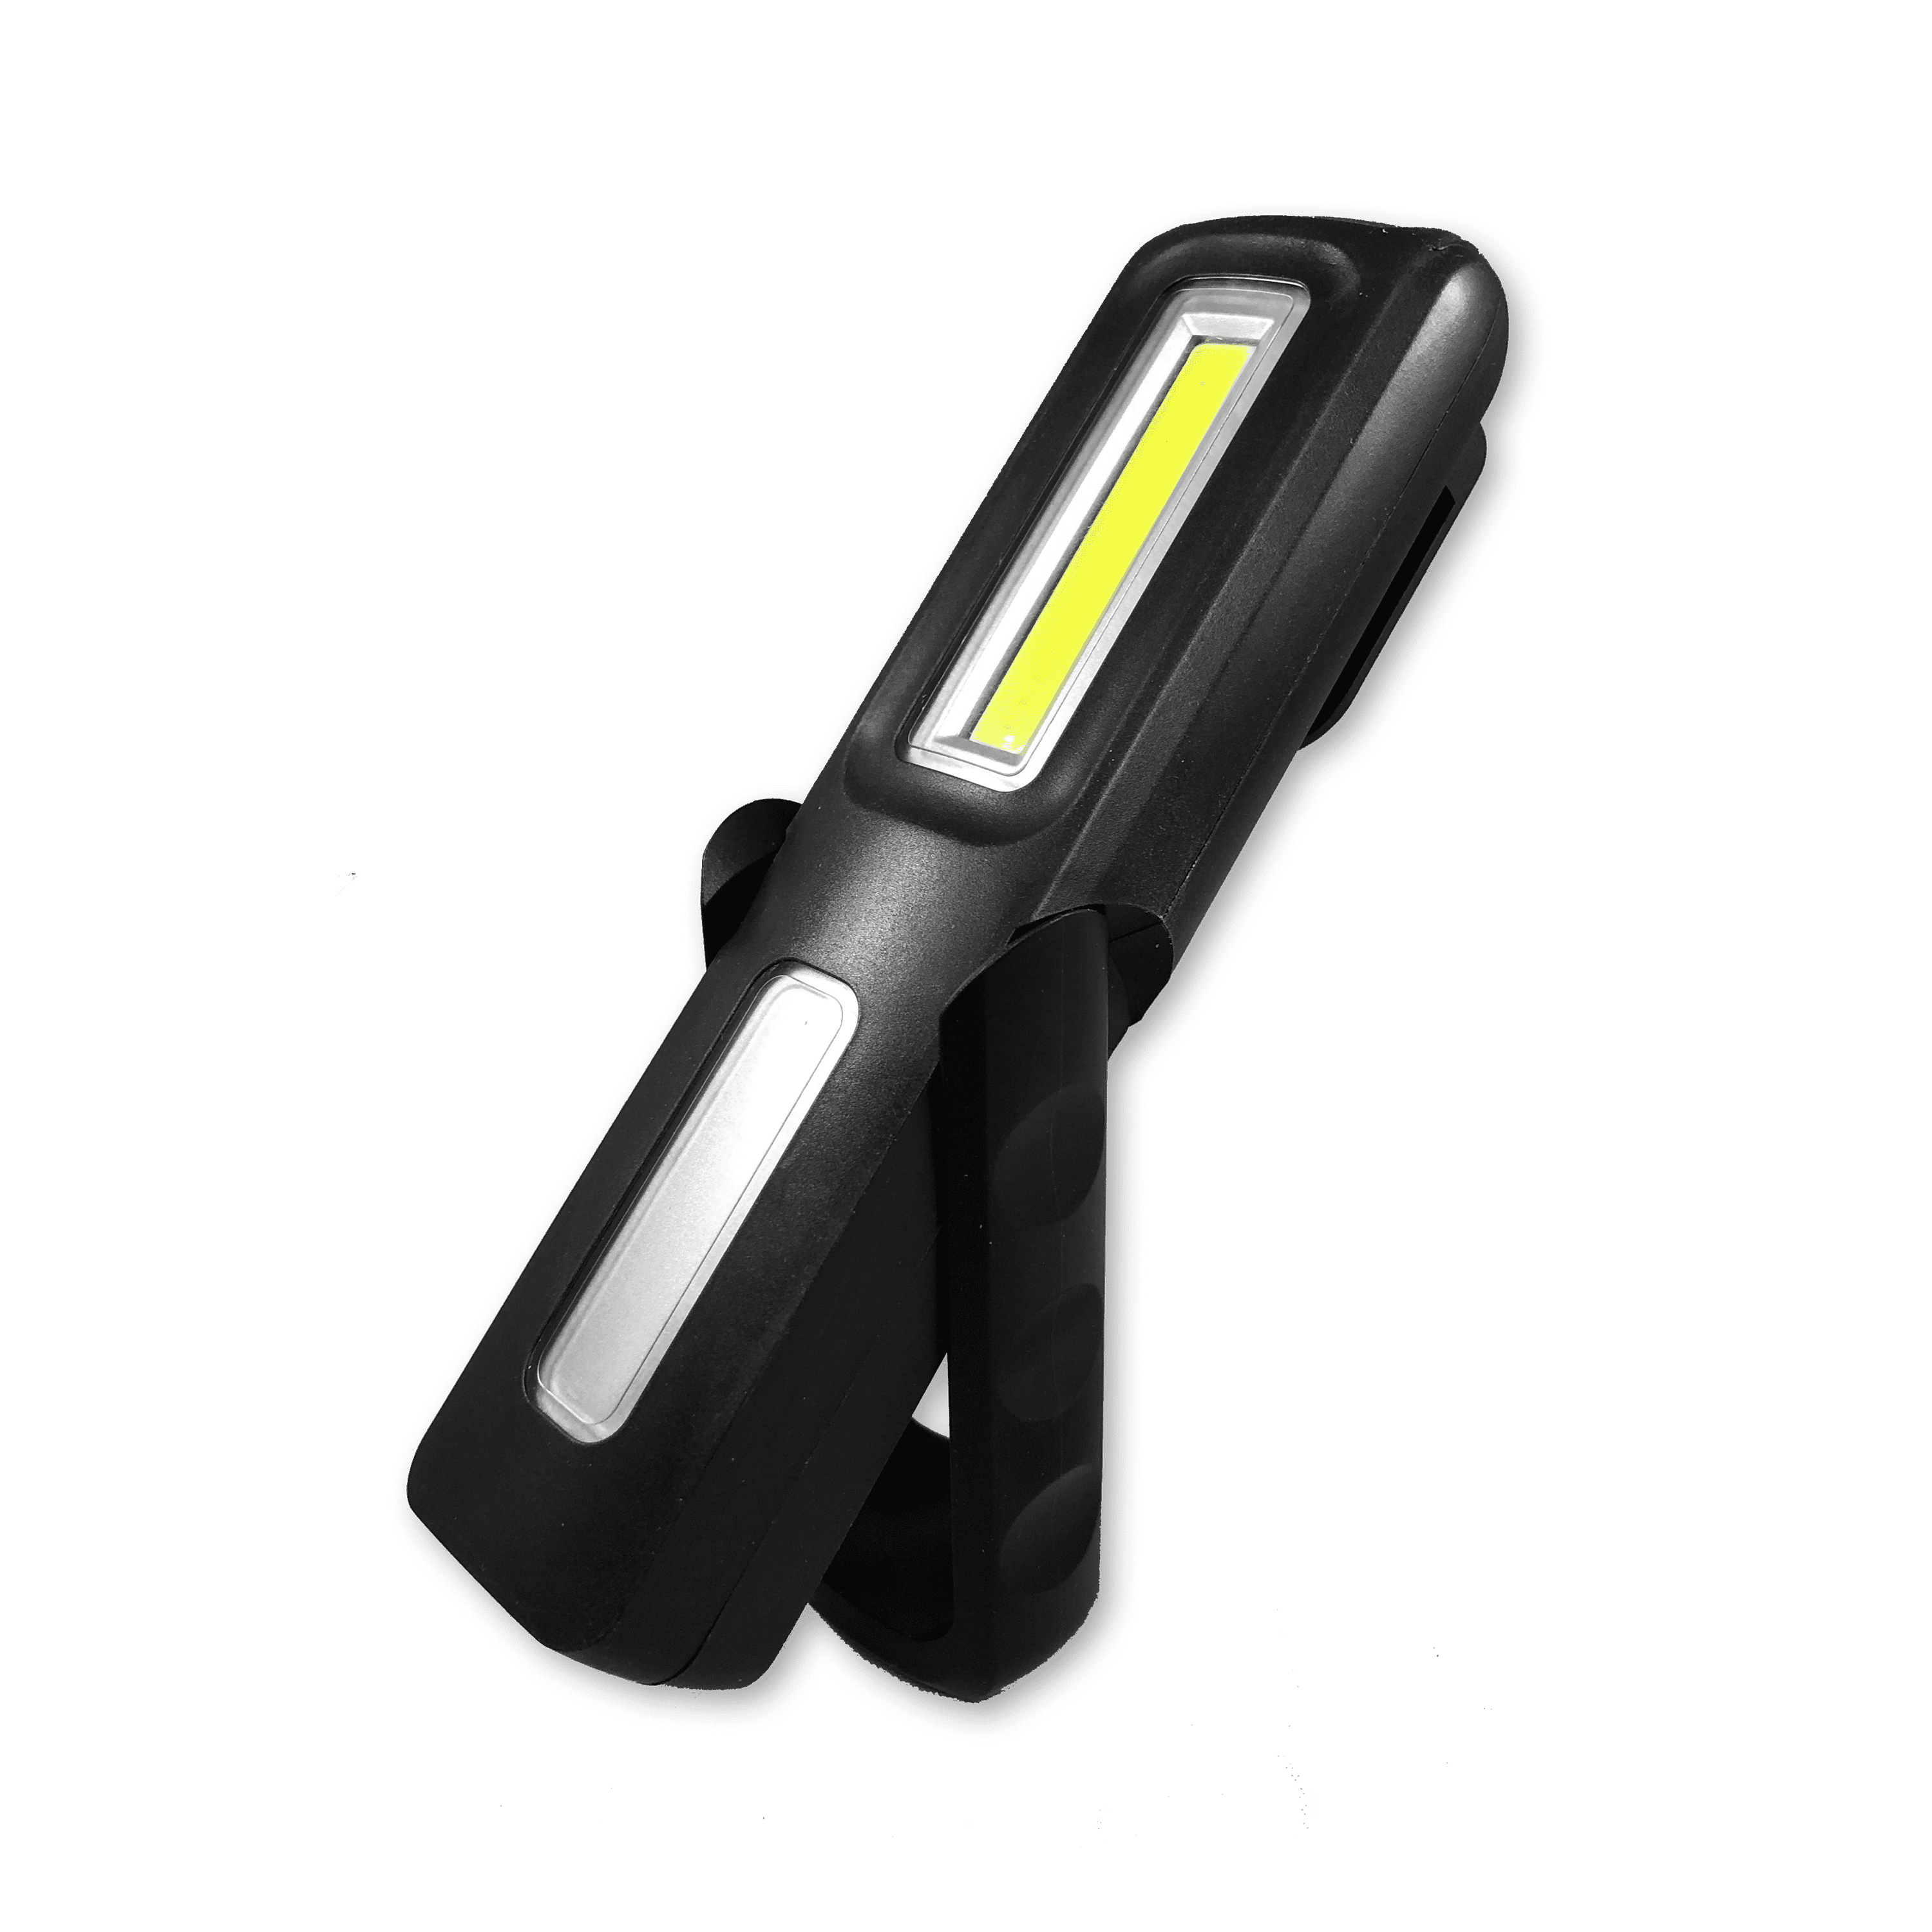 LED Pocket Work Light Offers 215 Lumens of Light Output with Magnetic Base